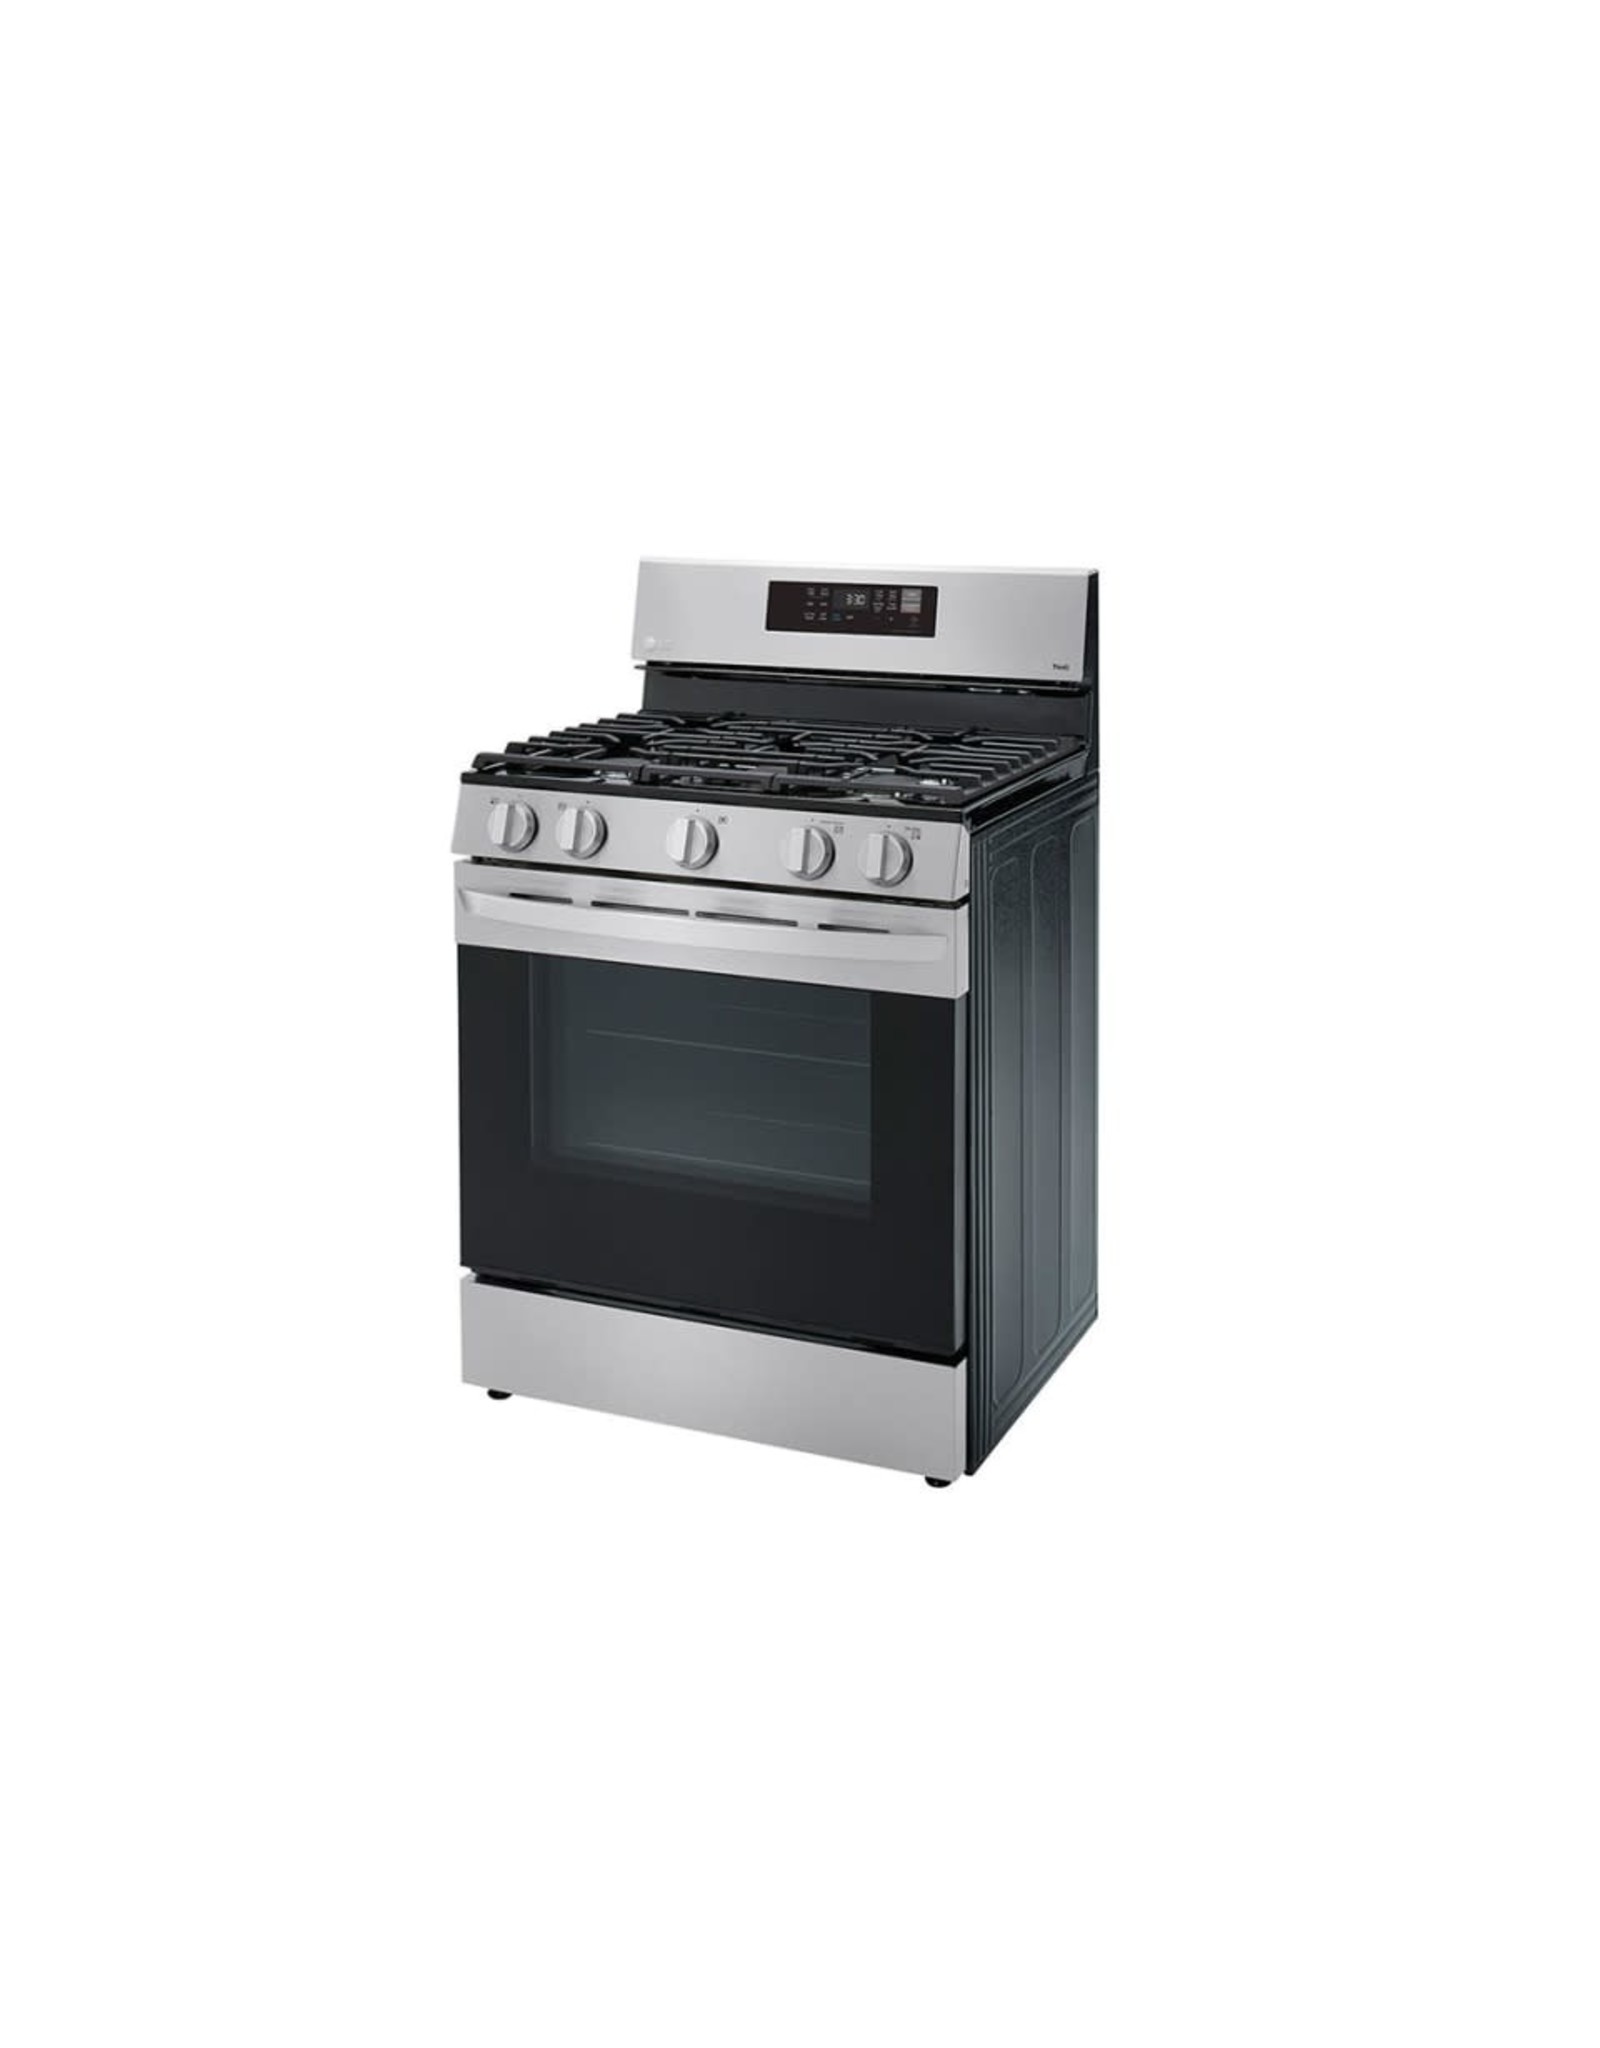 LRGL5823S 5.8 cu. ft. Smart Wi-Fi Enabled Fan Convection Gas Single Oven Range with AirFry and EasyClean in Stainless Steel